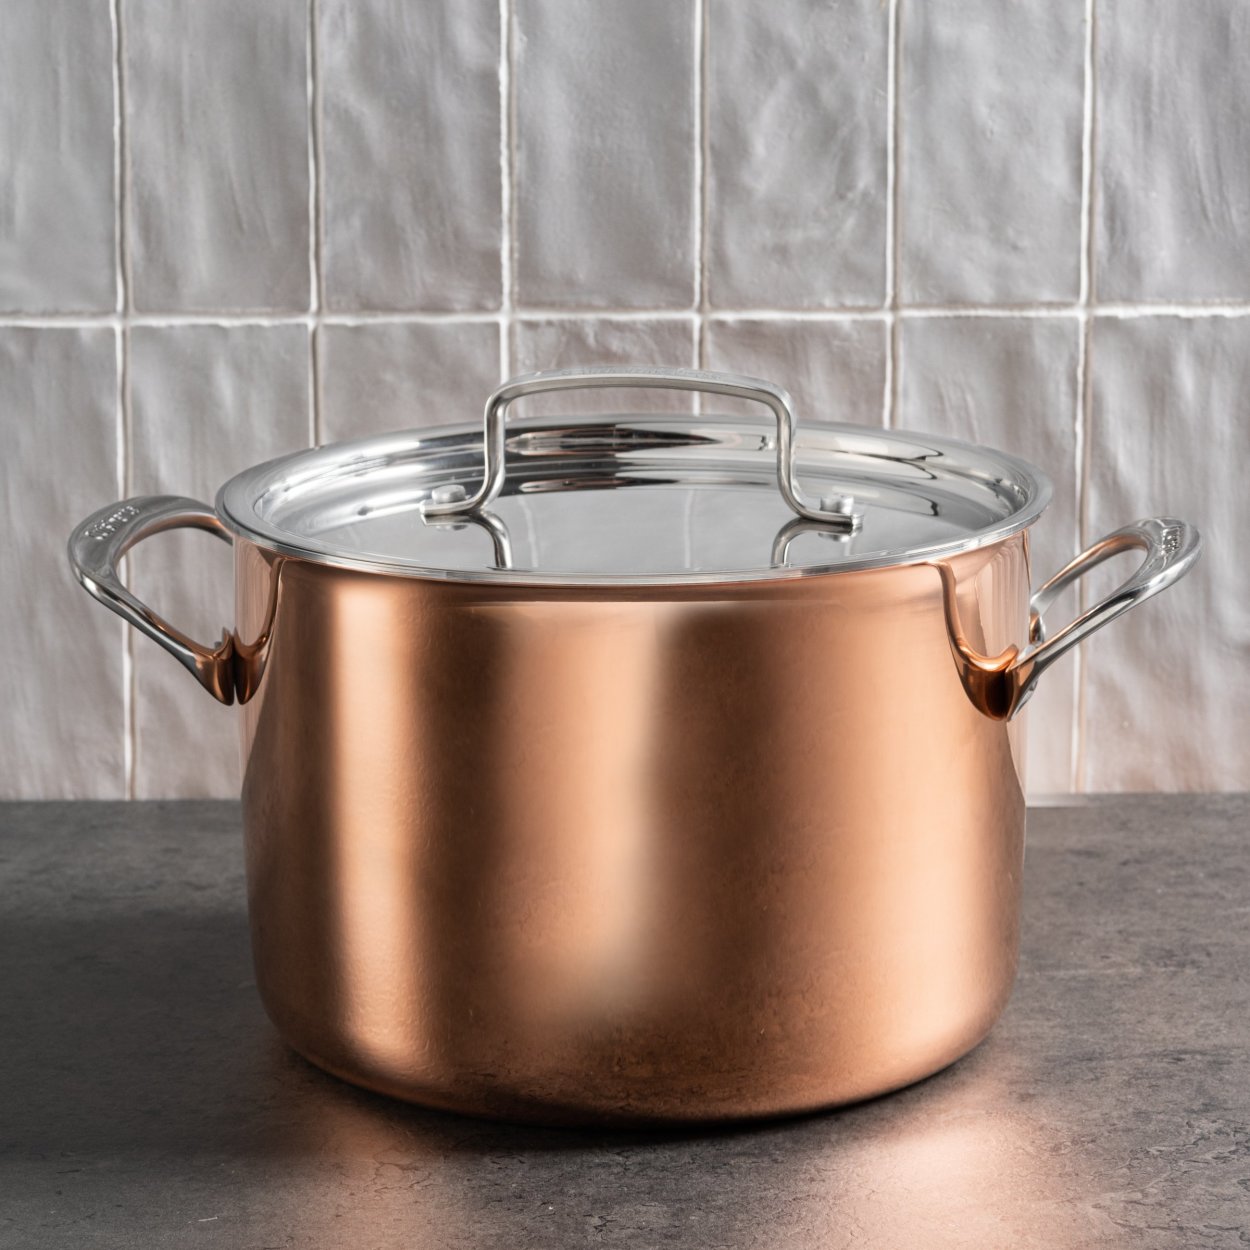 Copper Bottom Sears 8 Quart Stock Pot, Stainless Steel With Copper